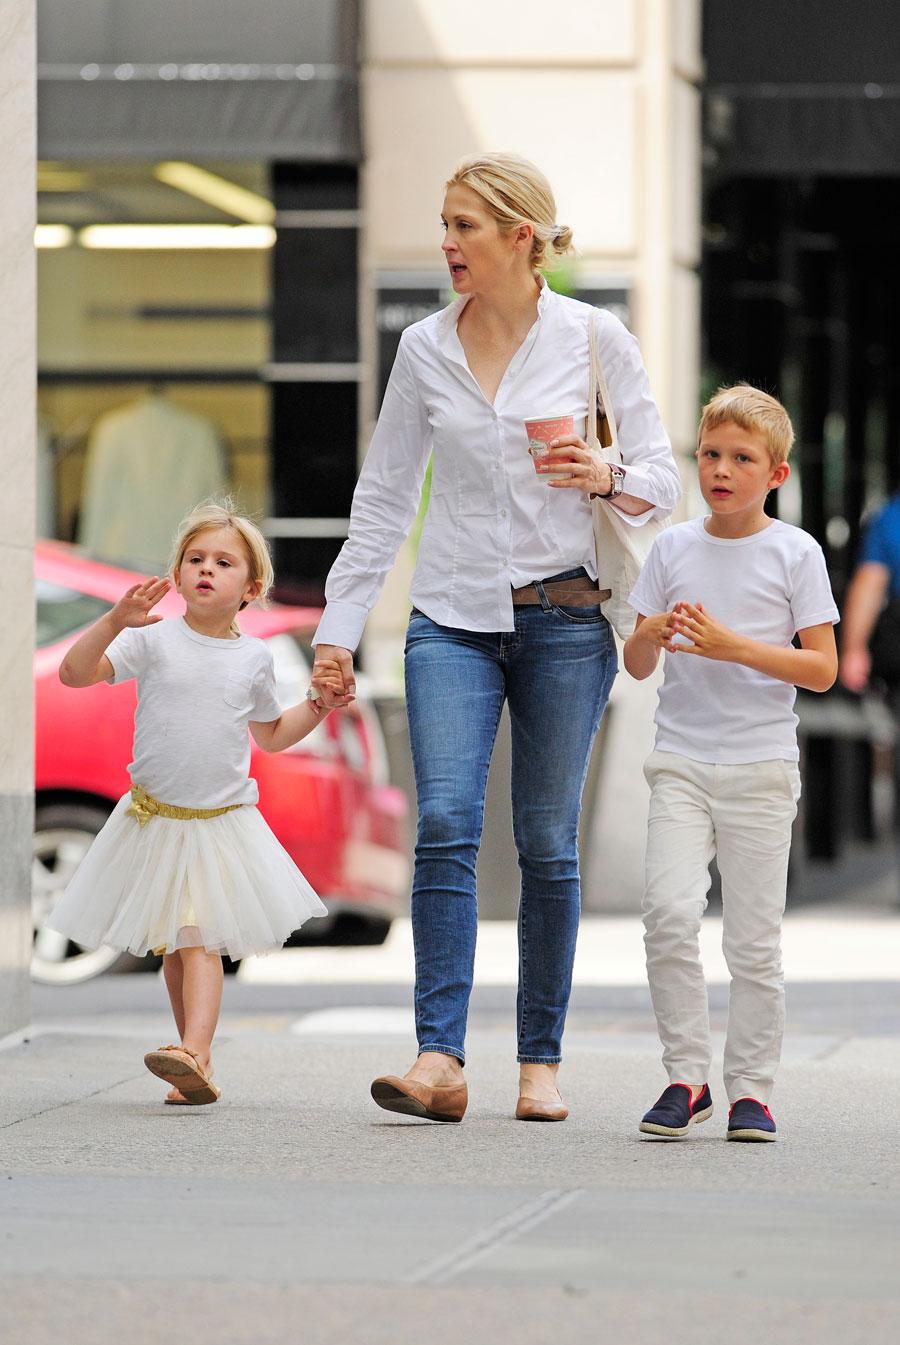 A Battle Won Kelly Rutherford's Shocking Custody Decision! 9 Photos Of